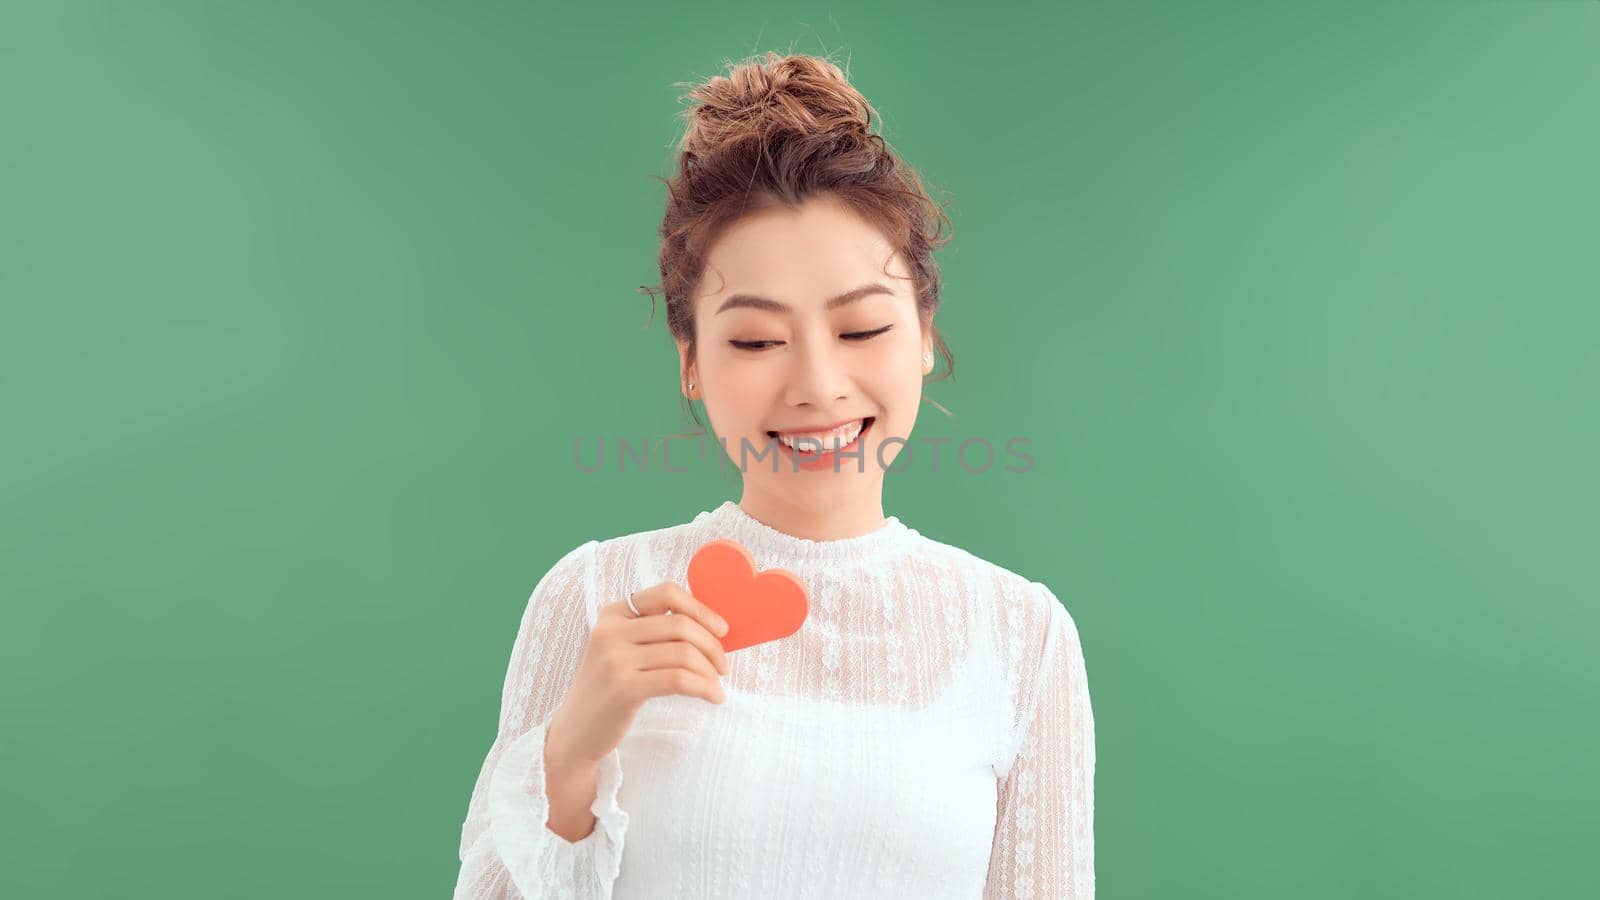 Beautiful young woman with red heart on color background